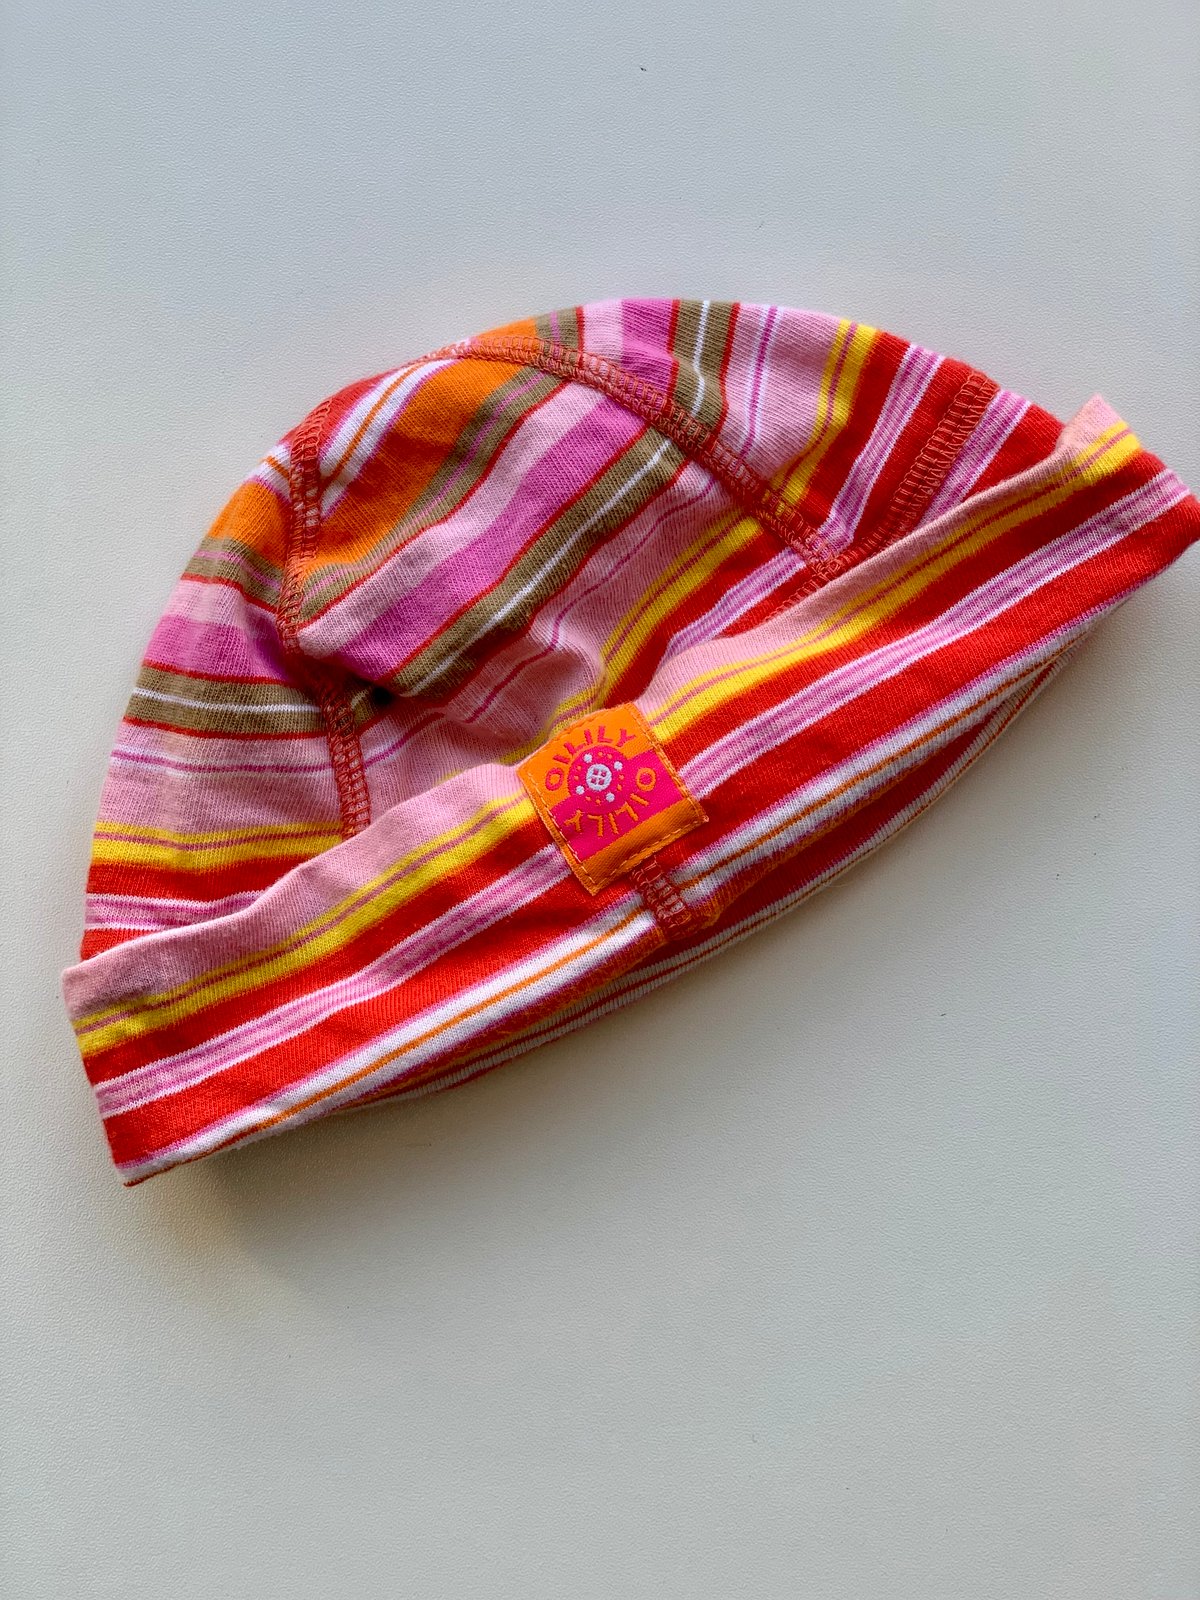 Image of Oilily baby t shirt and hat size 9 - 12 months 